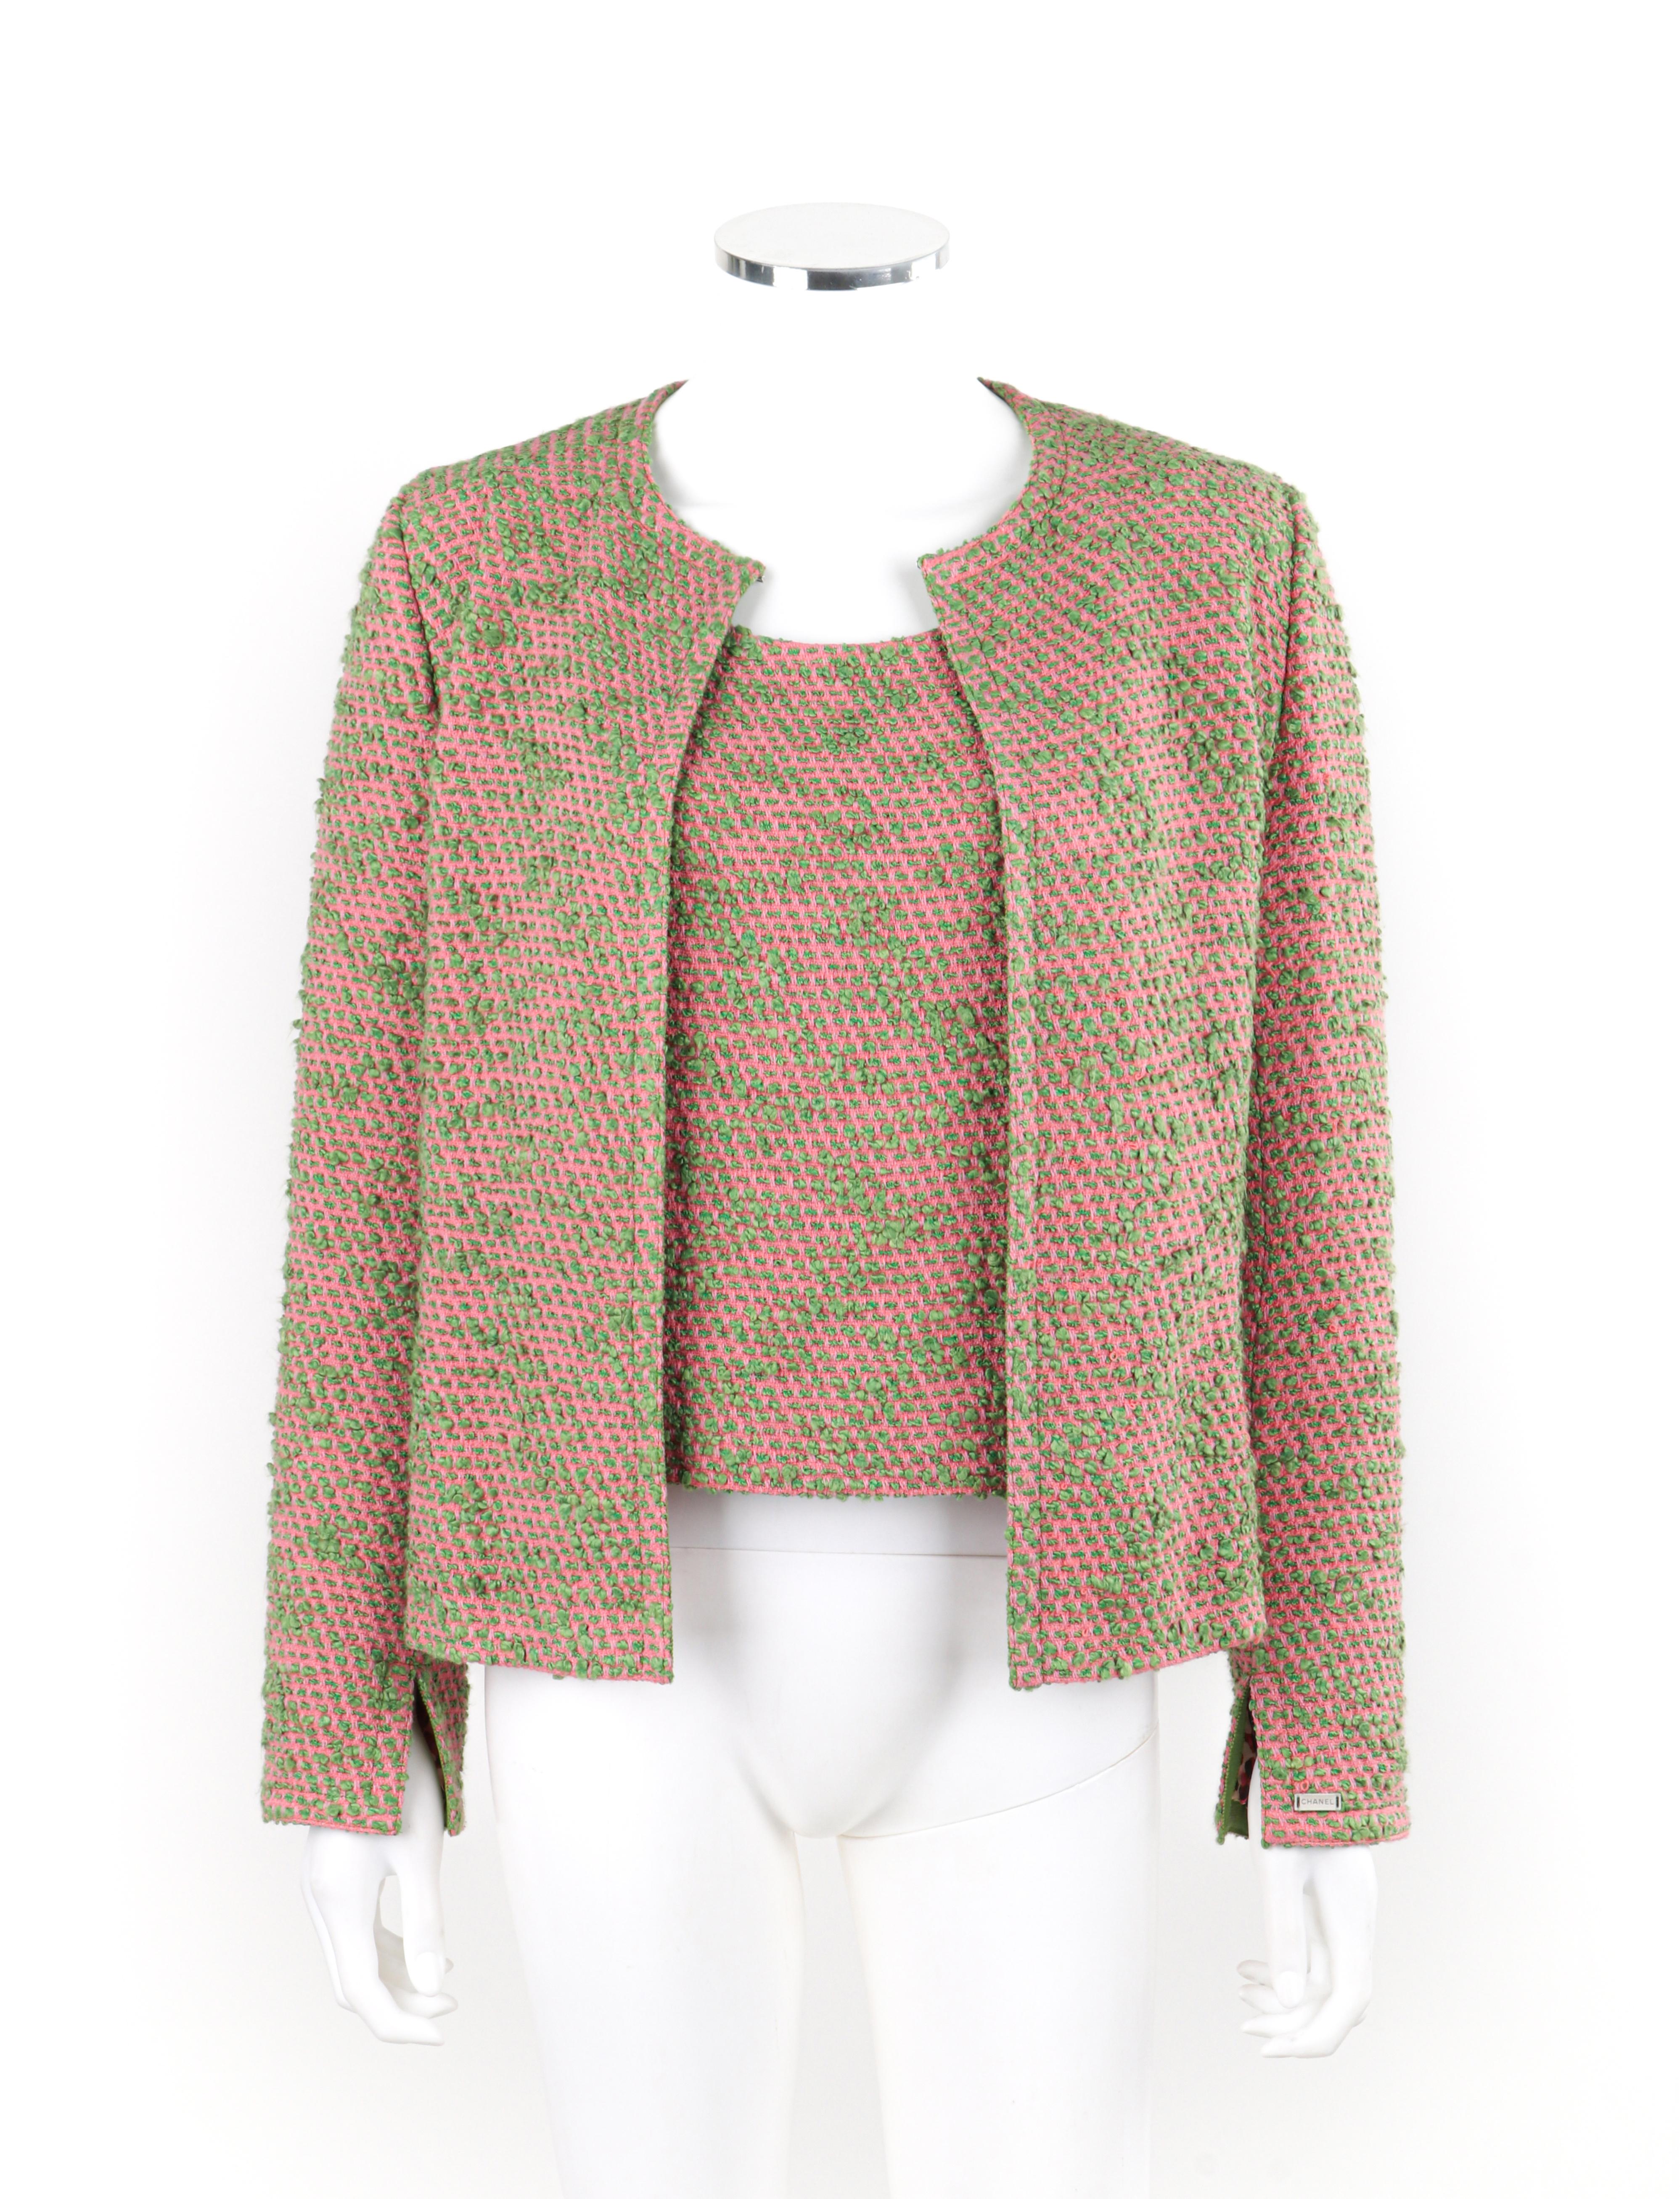 Brown CHANEL c.2000s Pink Green Boucle Knit Silk Jacket & Tank Top Shell 2pc Size 42 For Sale